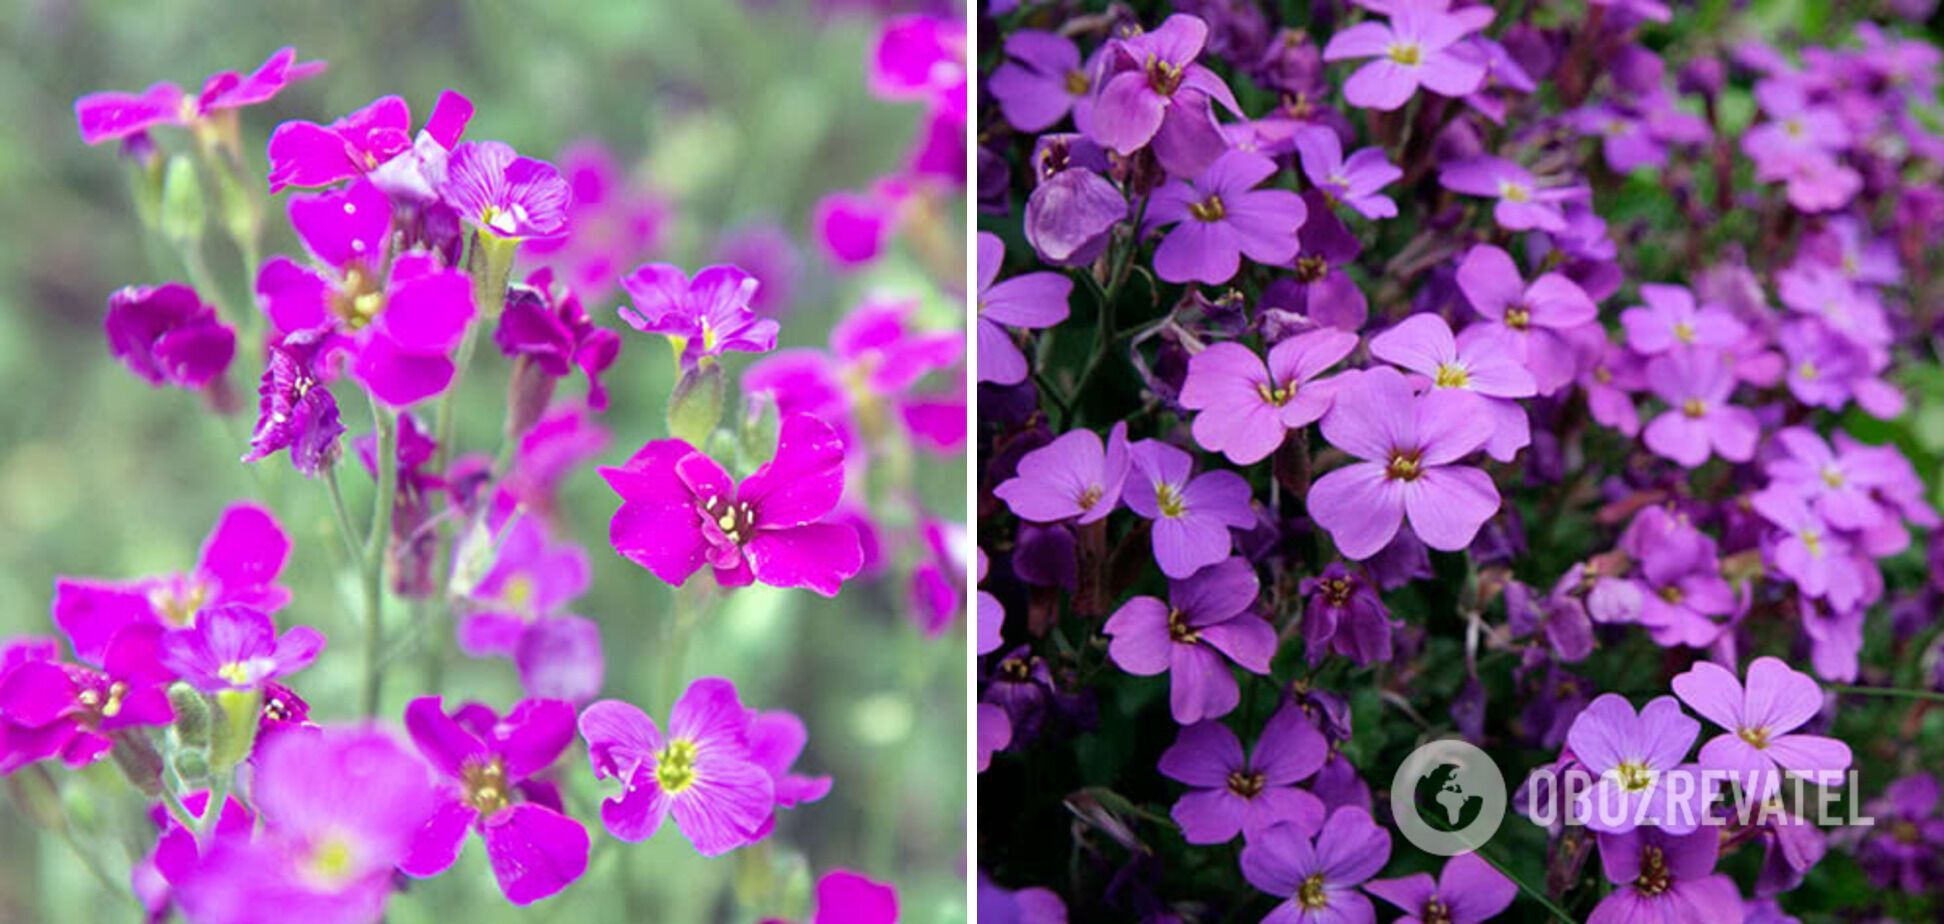 What perennials to sow in the garden in March: the most beautiful varieties